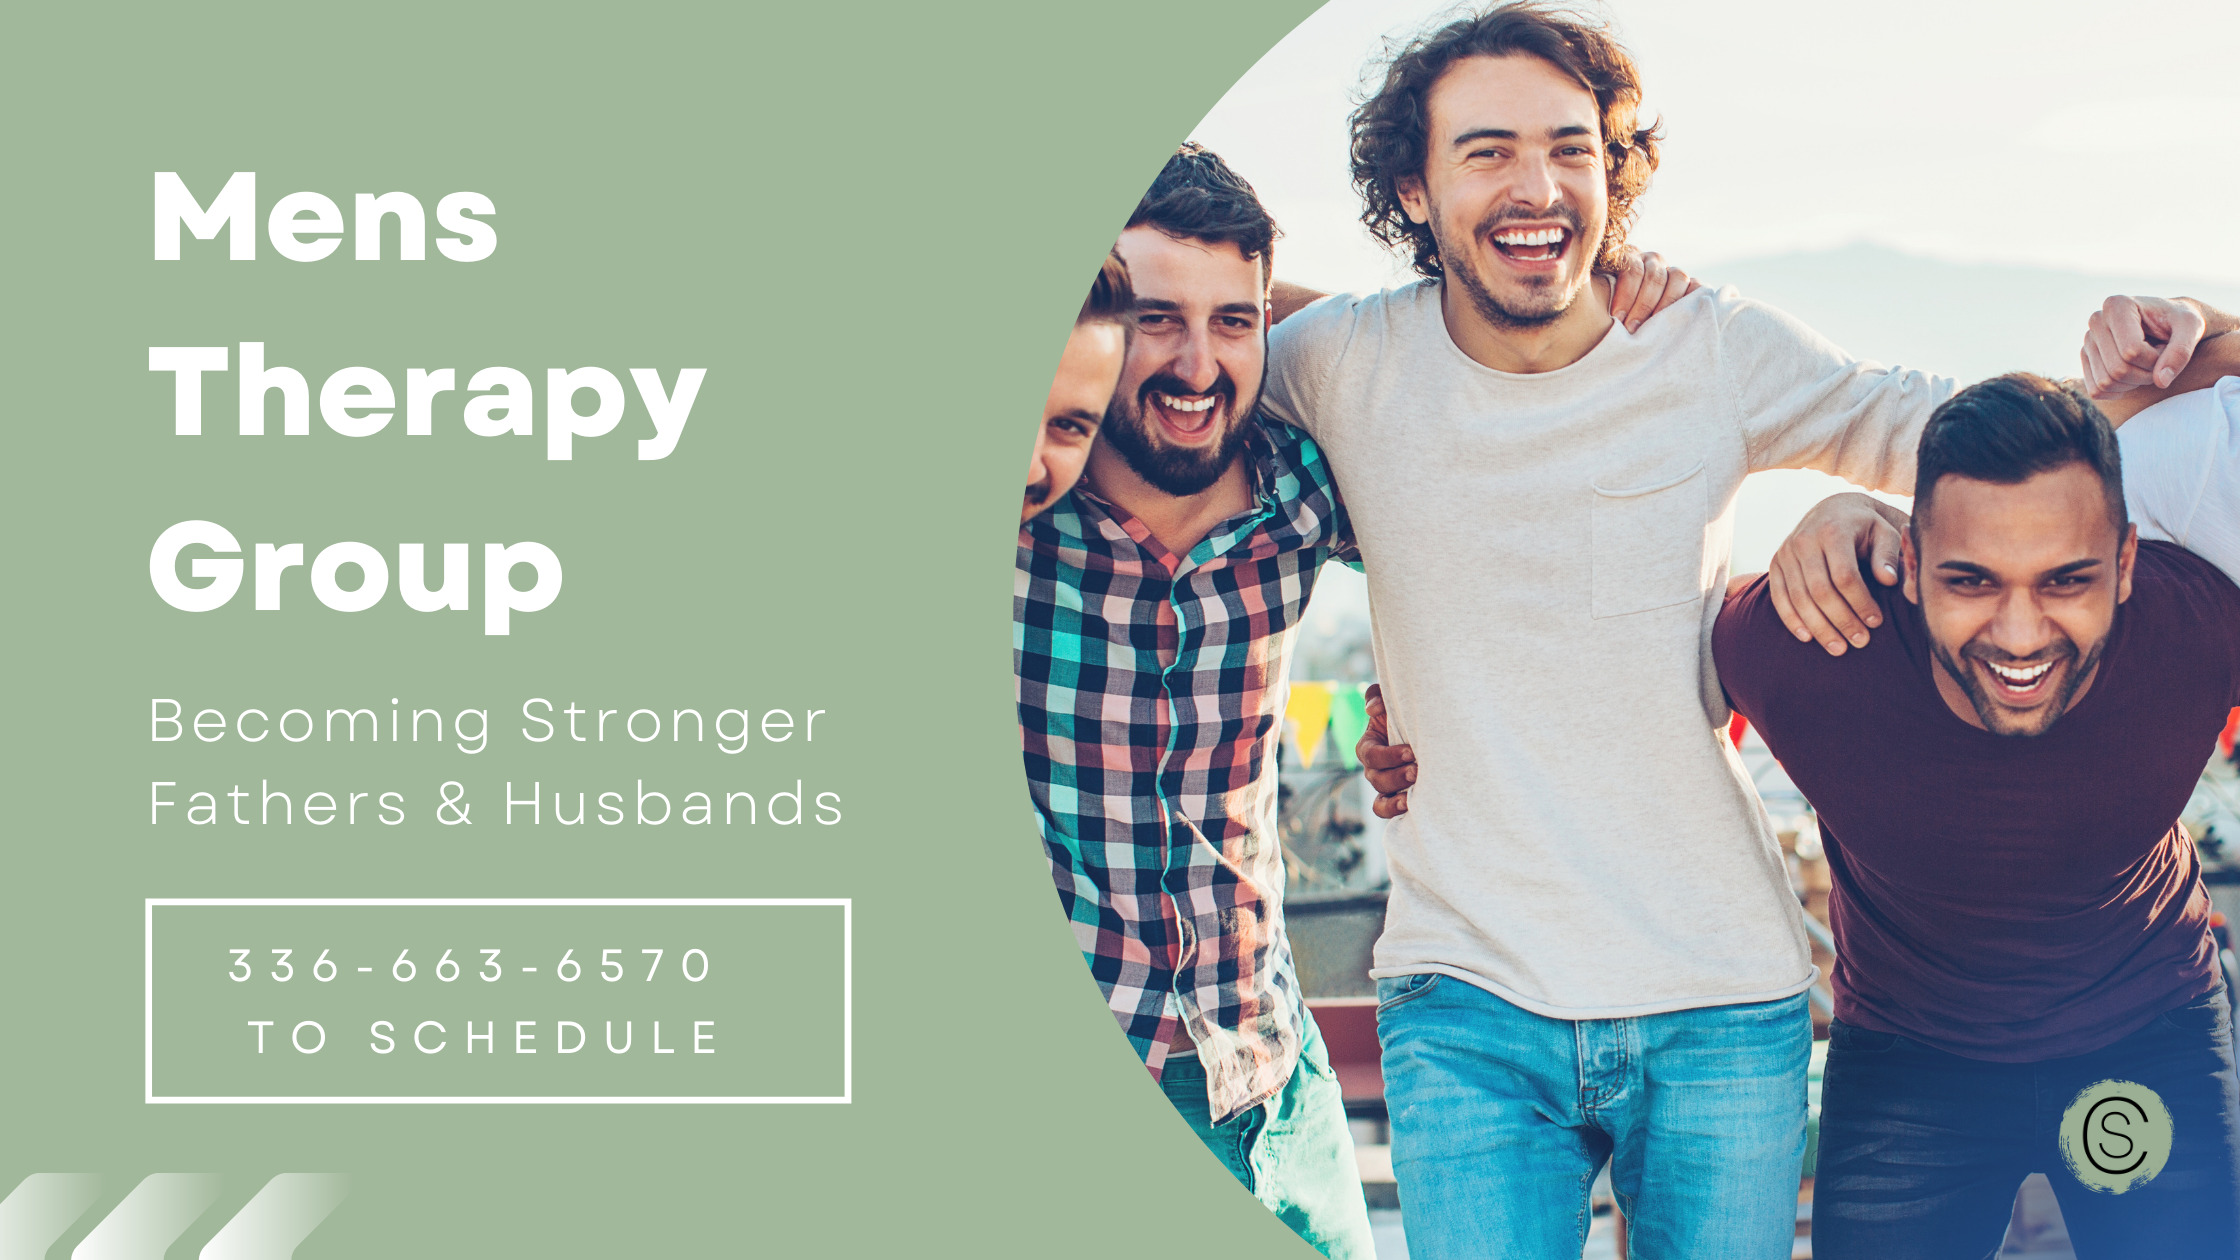 Mens Therapy Group To Help Men With Becoming Better Husbands, Fathers, Increasing Self-Esteem, and Improving Self-Confidence.